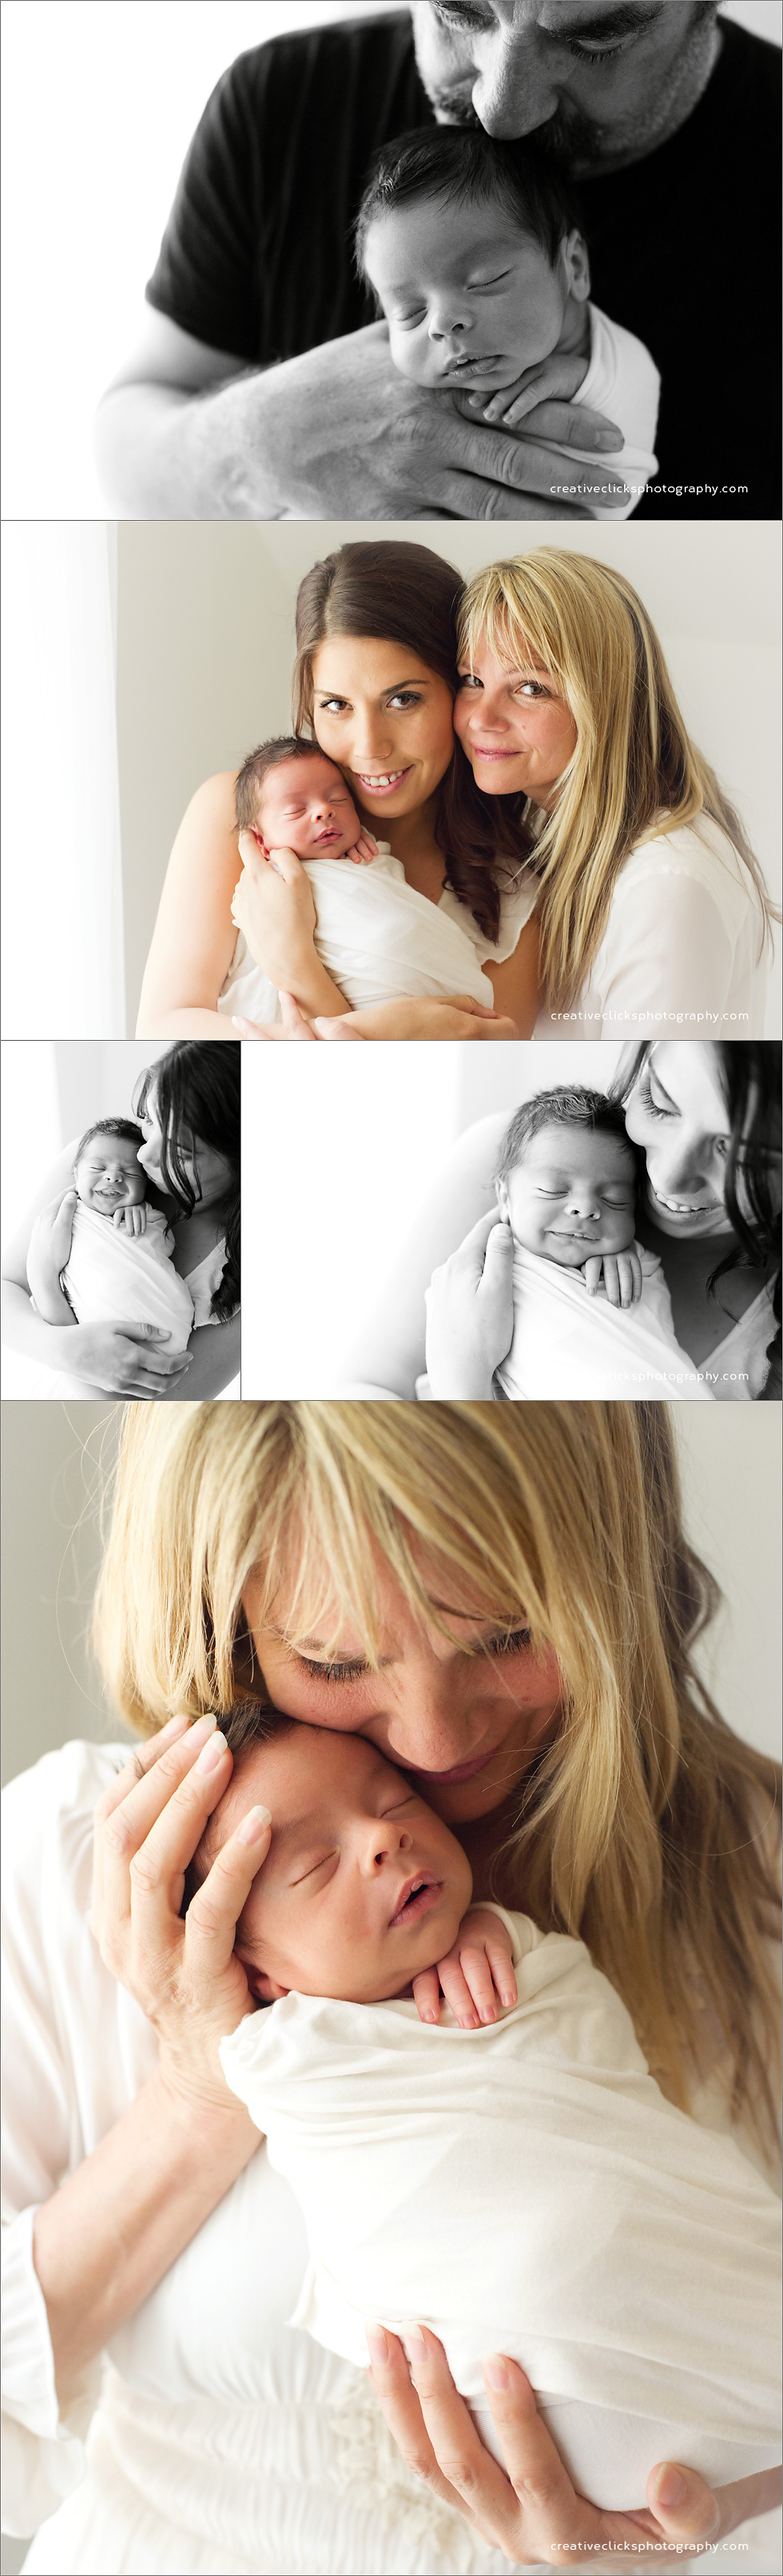 newborn baby boy in the arms of his family